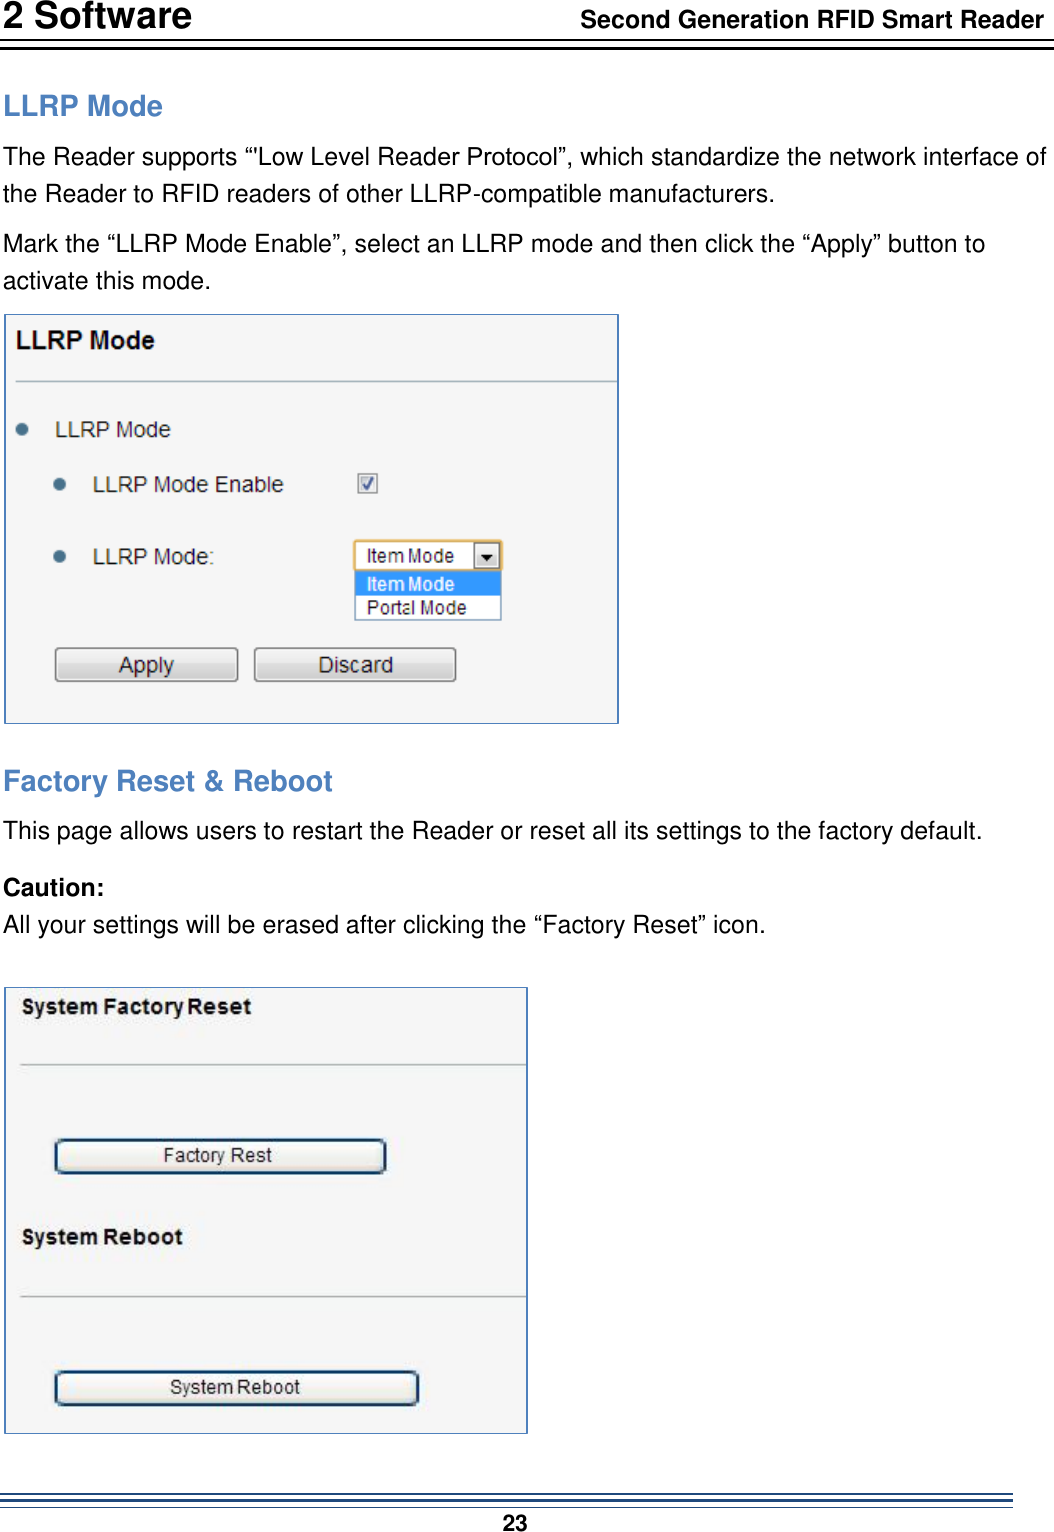 2 Software                                  Second Generation RFID Smart Reader                           23  LLRP Mode The Reader supports “&apos;Low Level Reader Protocol”, which standardize the network interface of the Reader to RFID readers of other LLRP-compatible manufacturers. Mark the “LLRP Mode Enable”, select an LLRP mode and then click the “Apply” button to activate this mode.    Factory Reset &amp; Reboot This page allows users to restart the Reader or reset all its settings to the factory default. Caution:   All your settings will be erased after clicking the “Factory Reset” icon.  